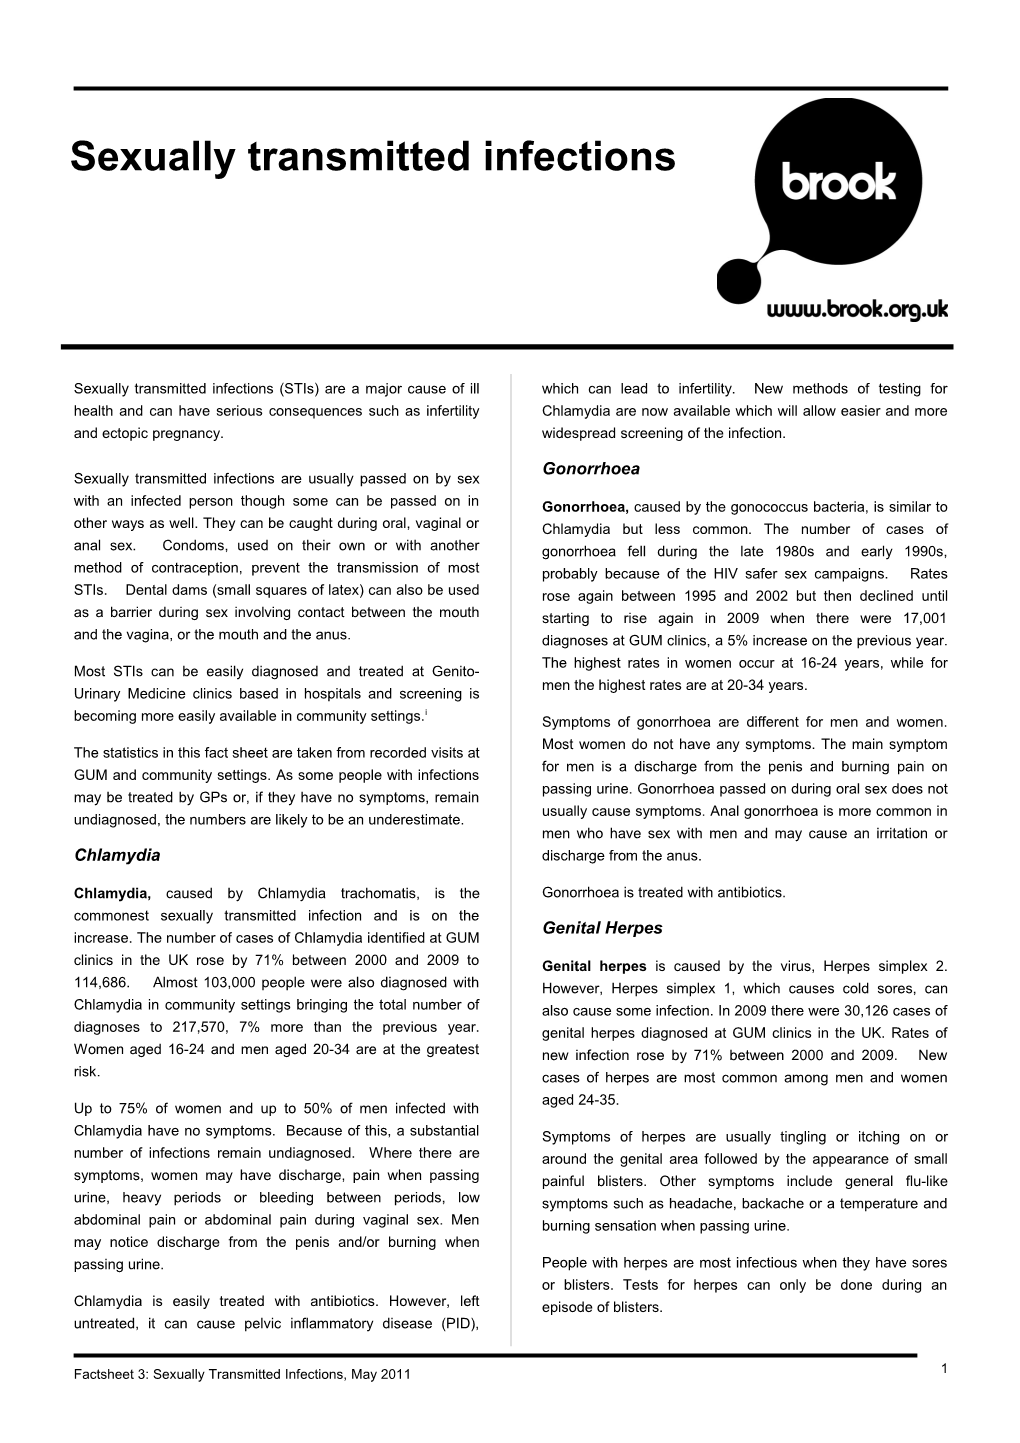 Factsheet 3: Sexually Transmitted Infections, May 2011